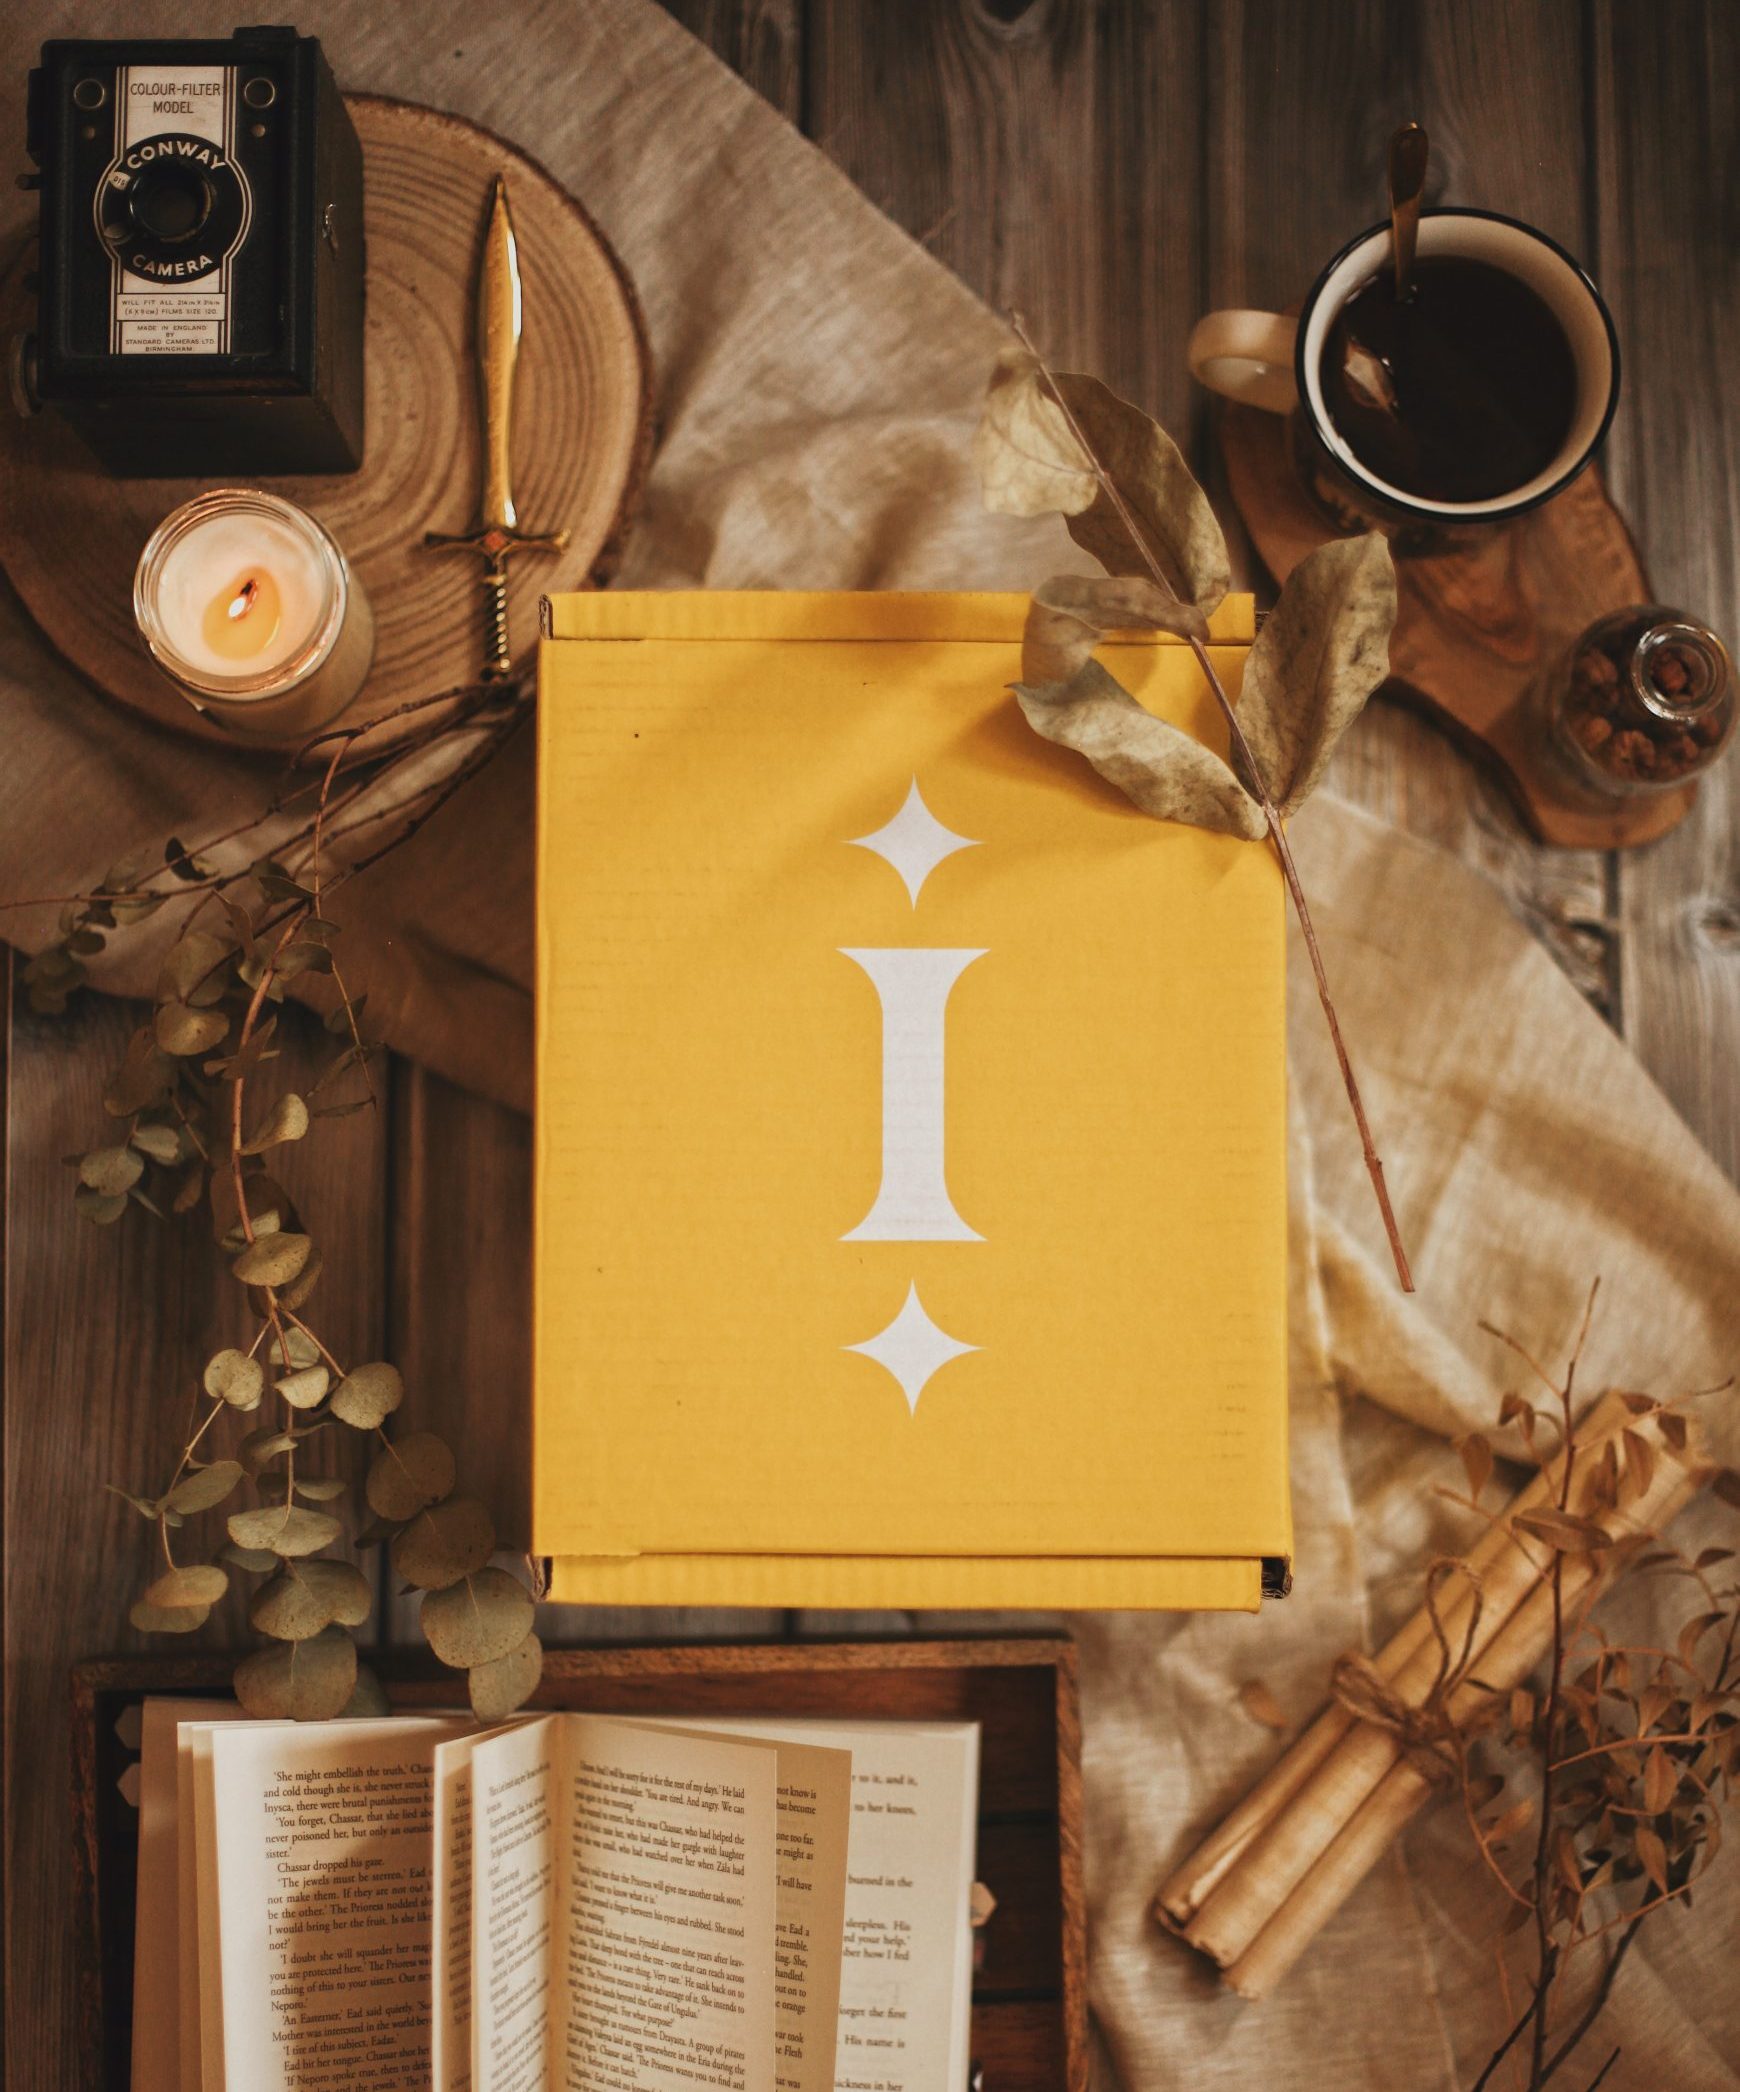 A yellow Illumicrate box on a table surrounded by old items